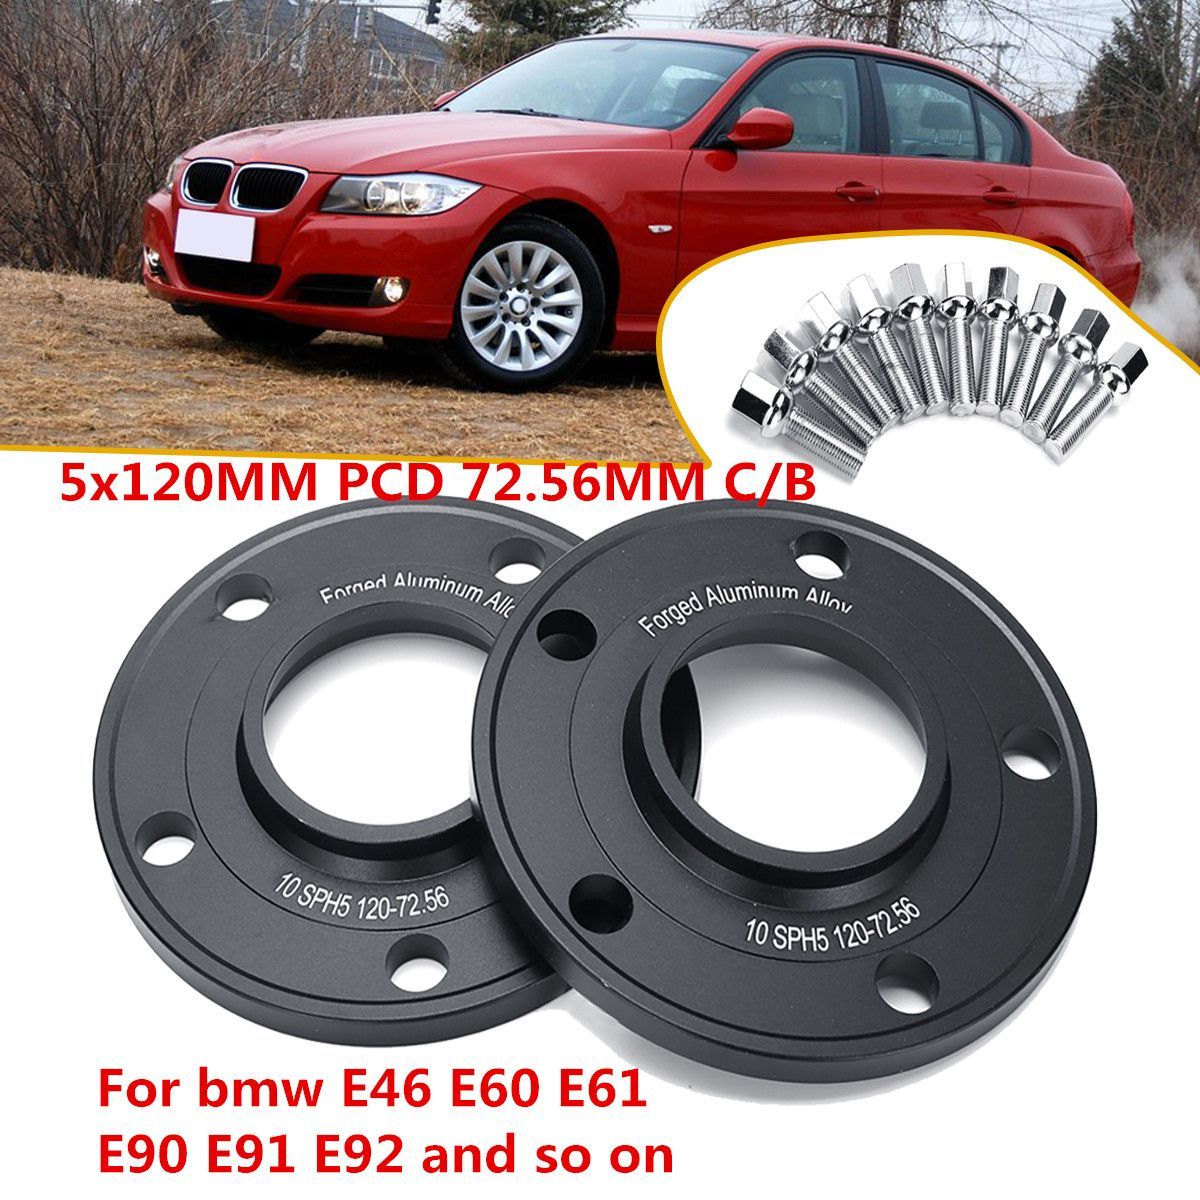 2PCS-5x120-PCD-10mm-Hubcentric-Alloy-7256mm-Aluminum-Wheel-Spacer-Shims-Adapter-Suit-for-BMW-E46-E90-1542014